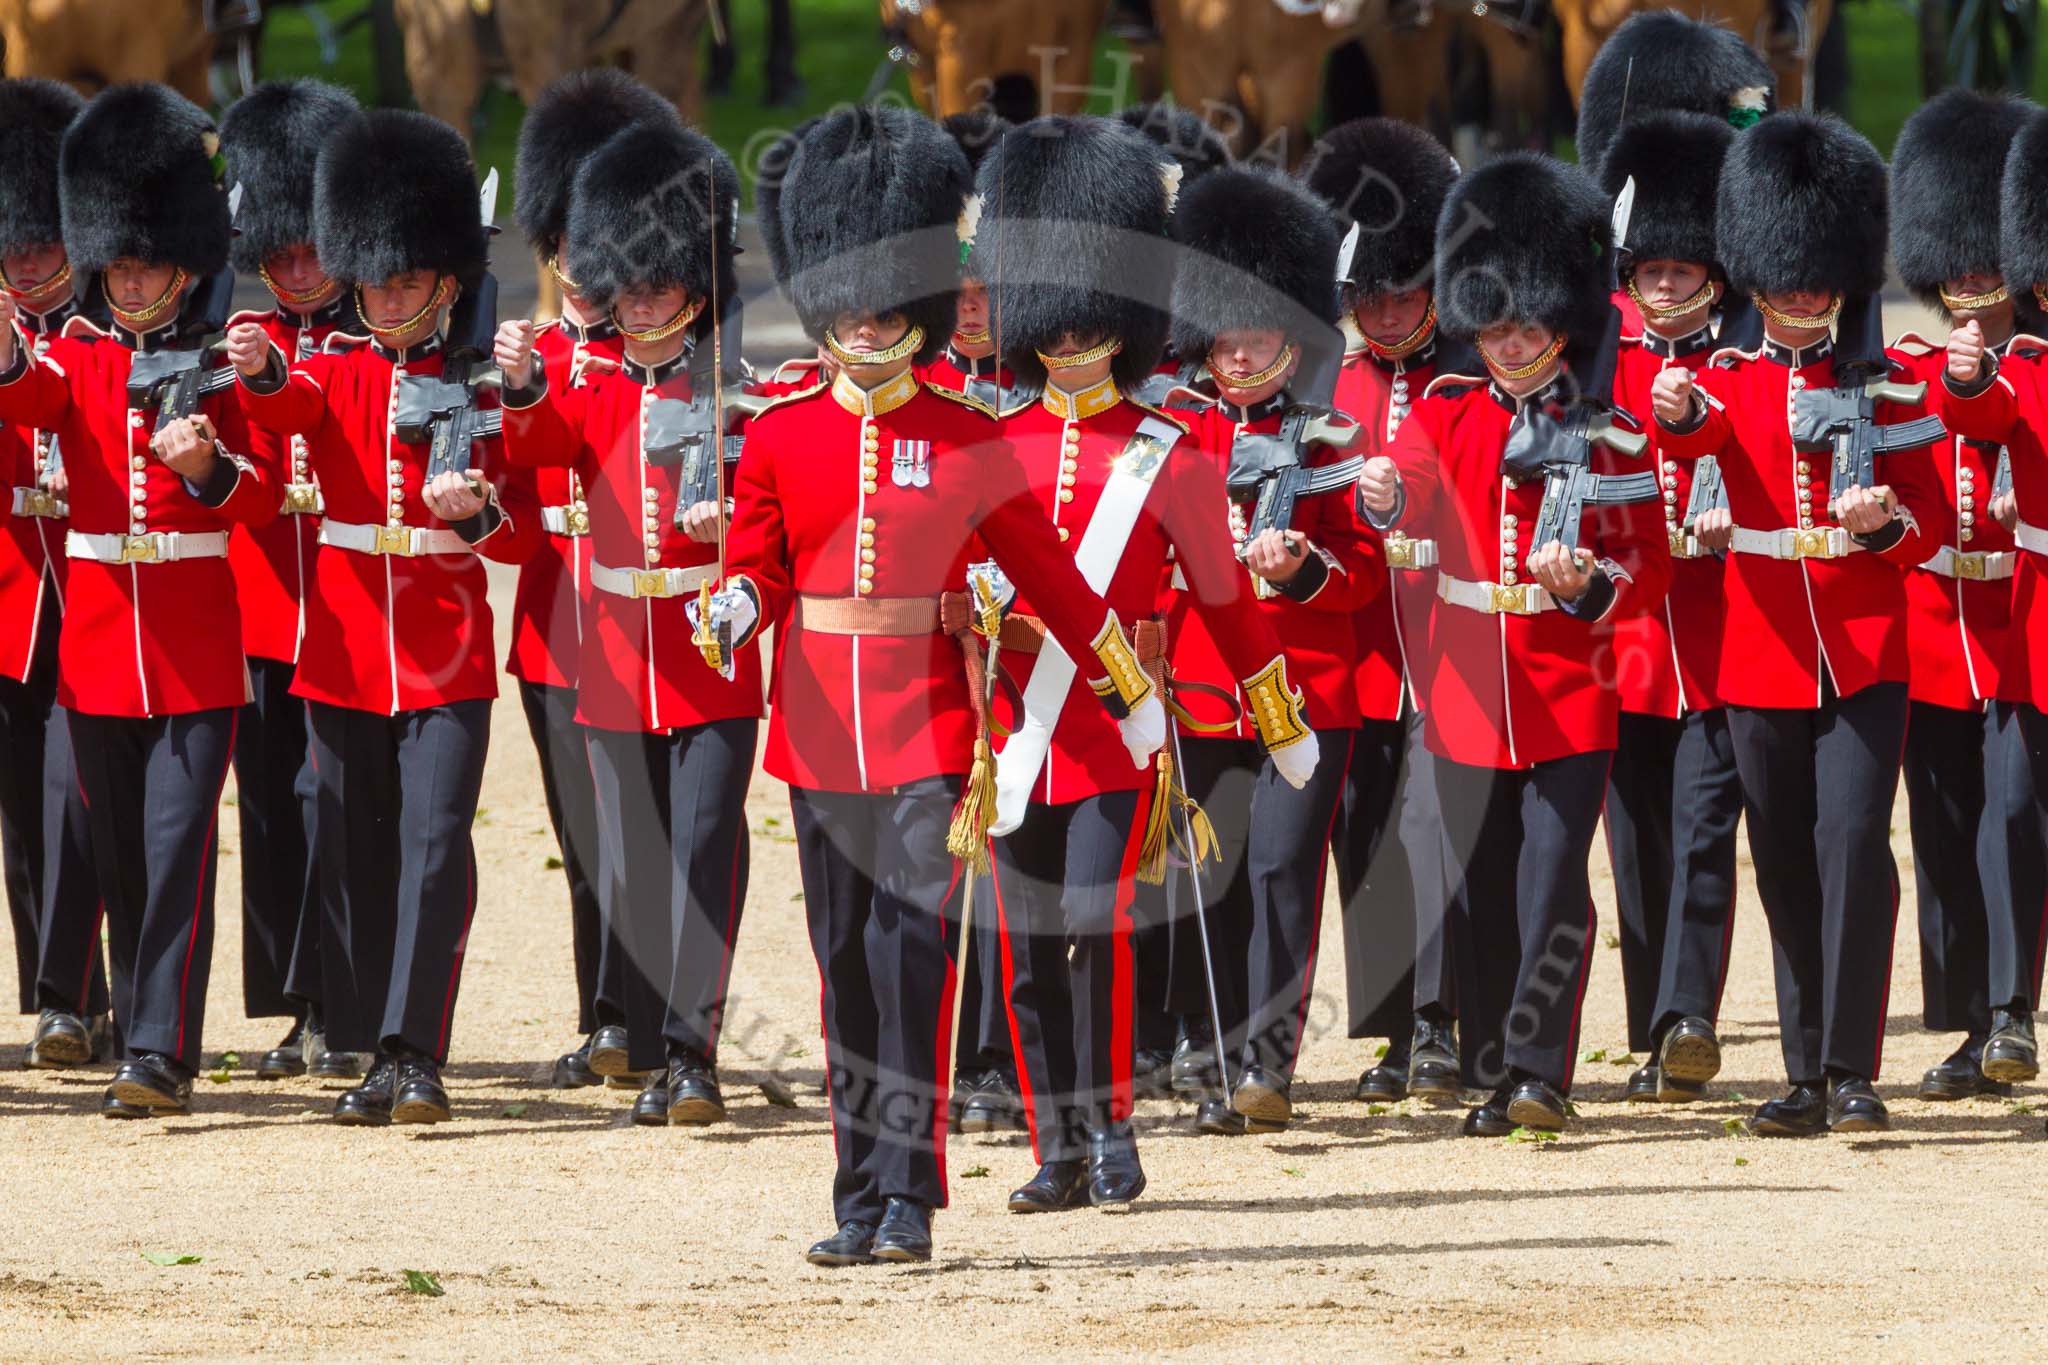 The Colonel's Review 2015.
Horse Guards Parade, Westminster,
London,

United Kingdom,
on 06 June 2015 at 11:16, image #289